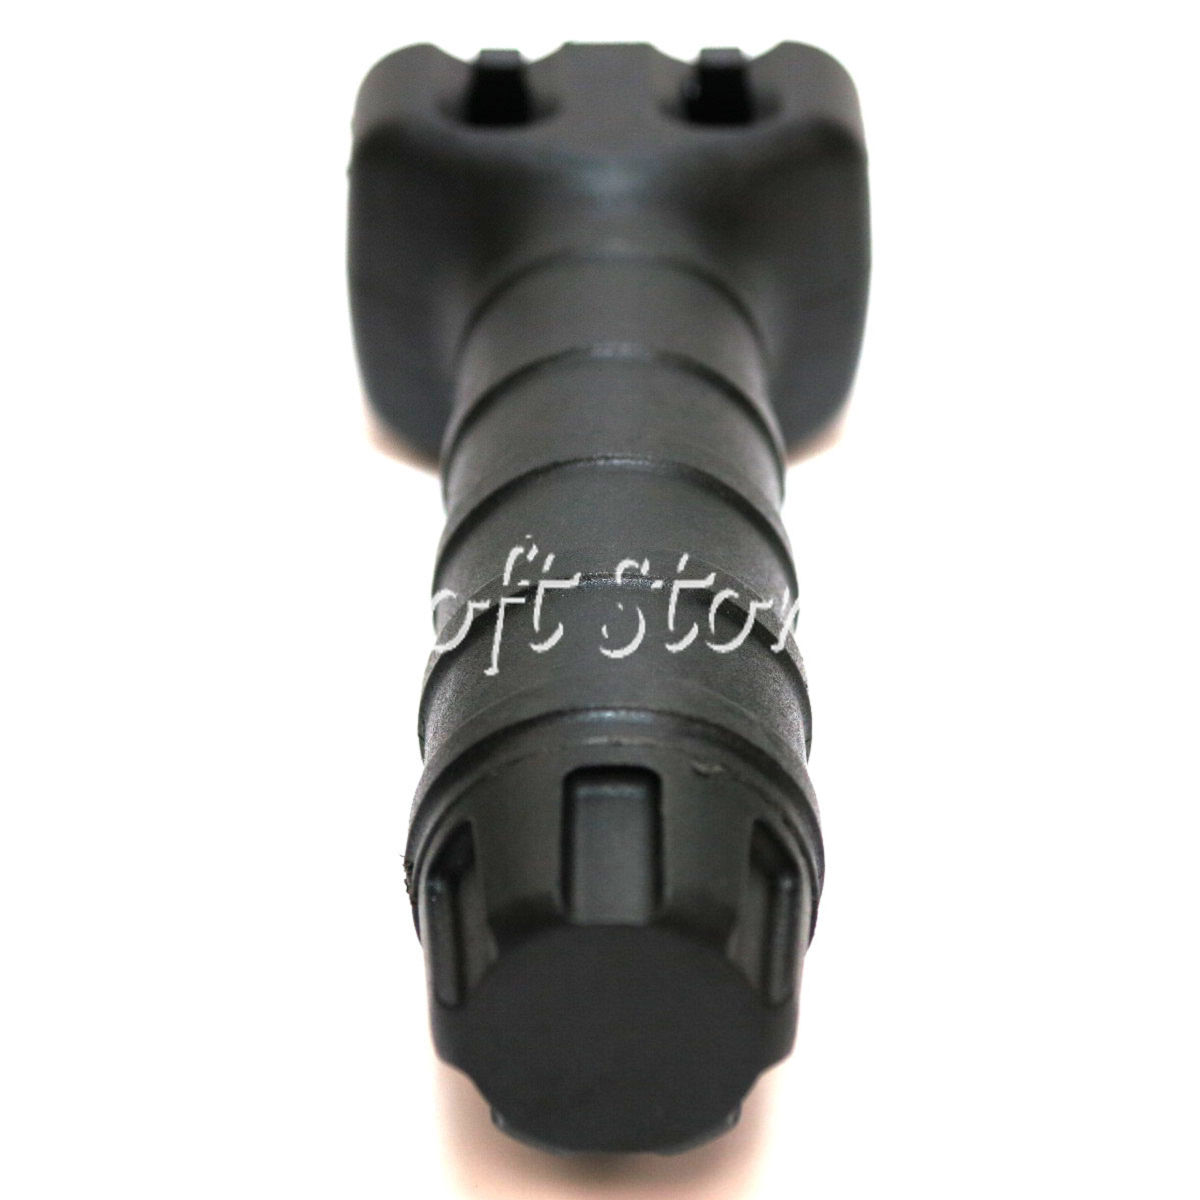 Airsoft Tactical Gear D-Boys TD Style Tactical RIS Foregrip Black - Click Image to Close